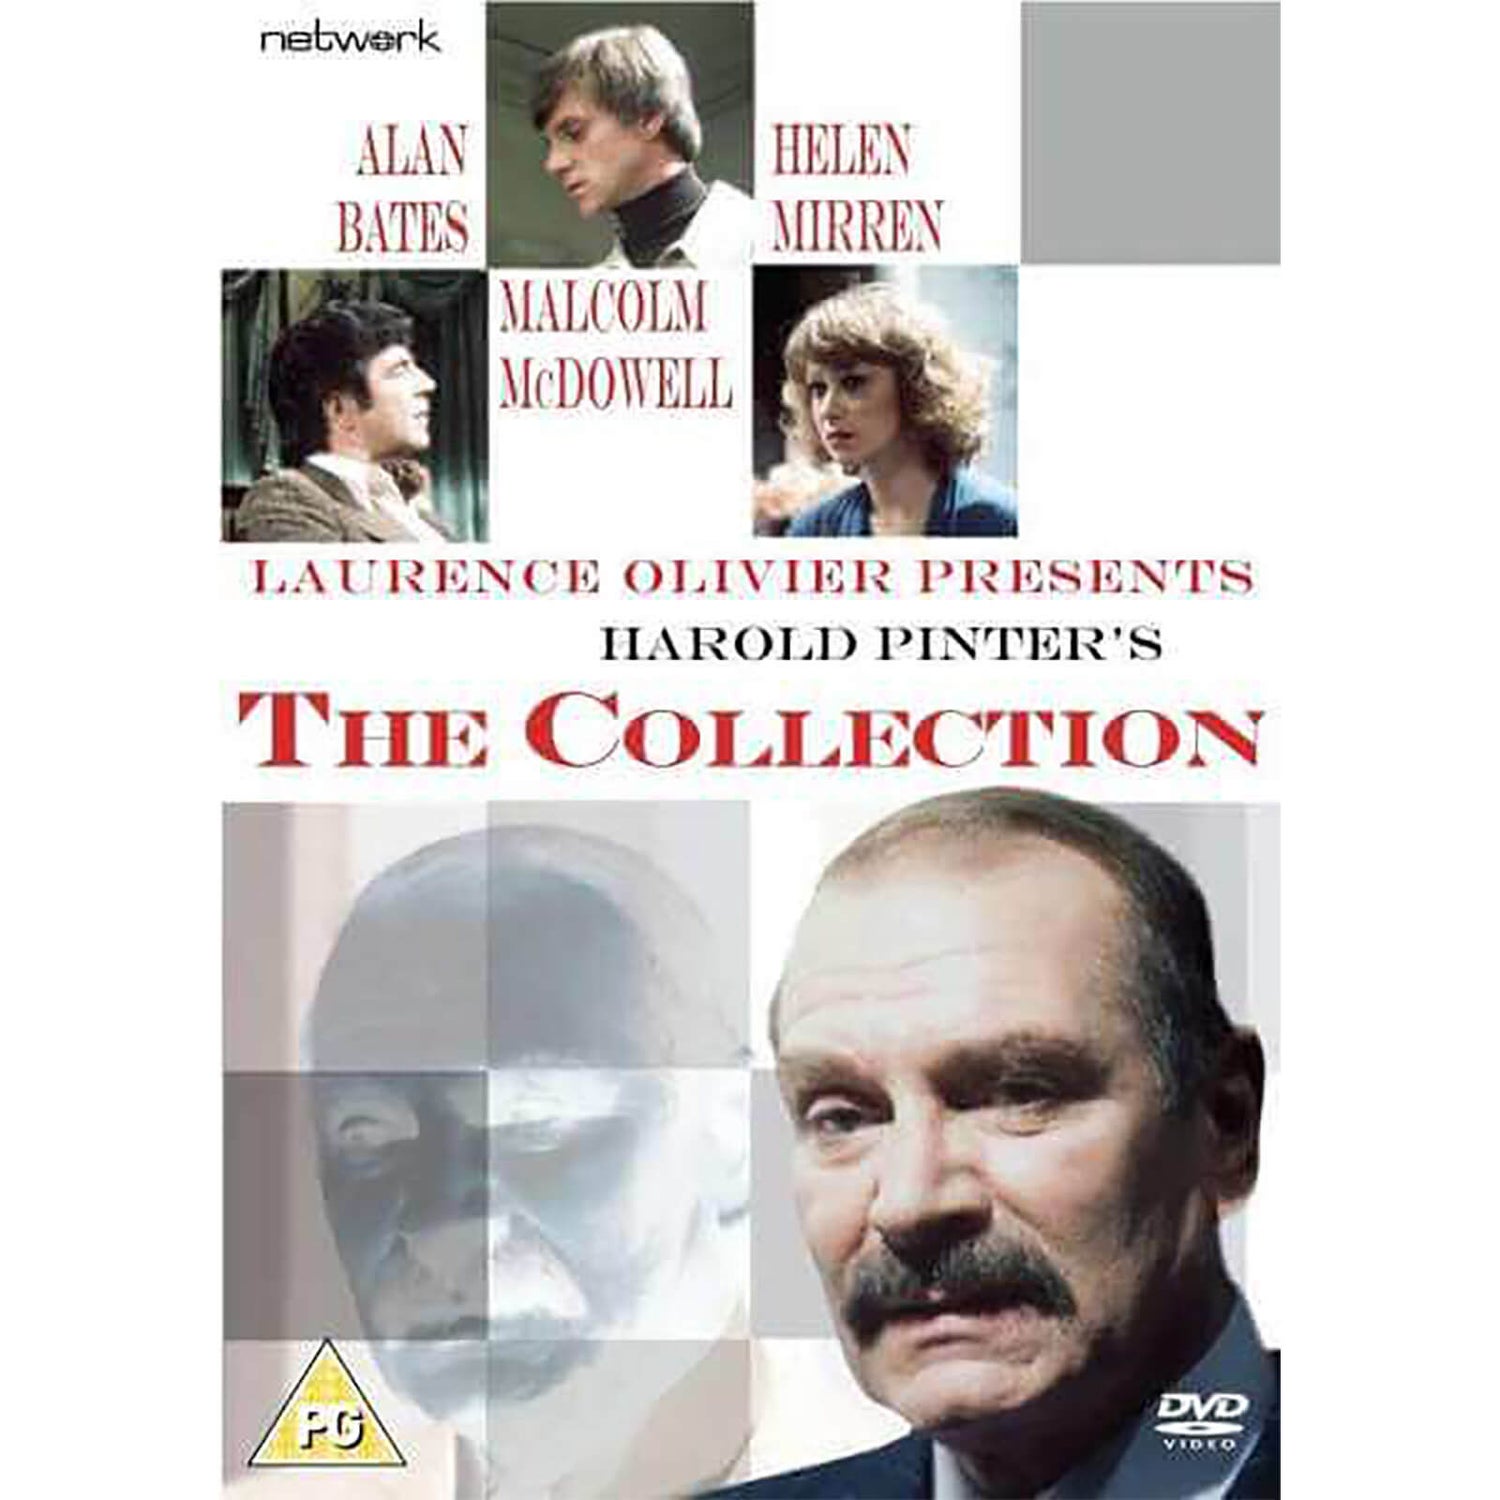 Harold Pinter's The Collection